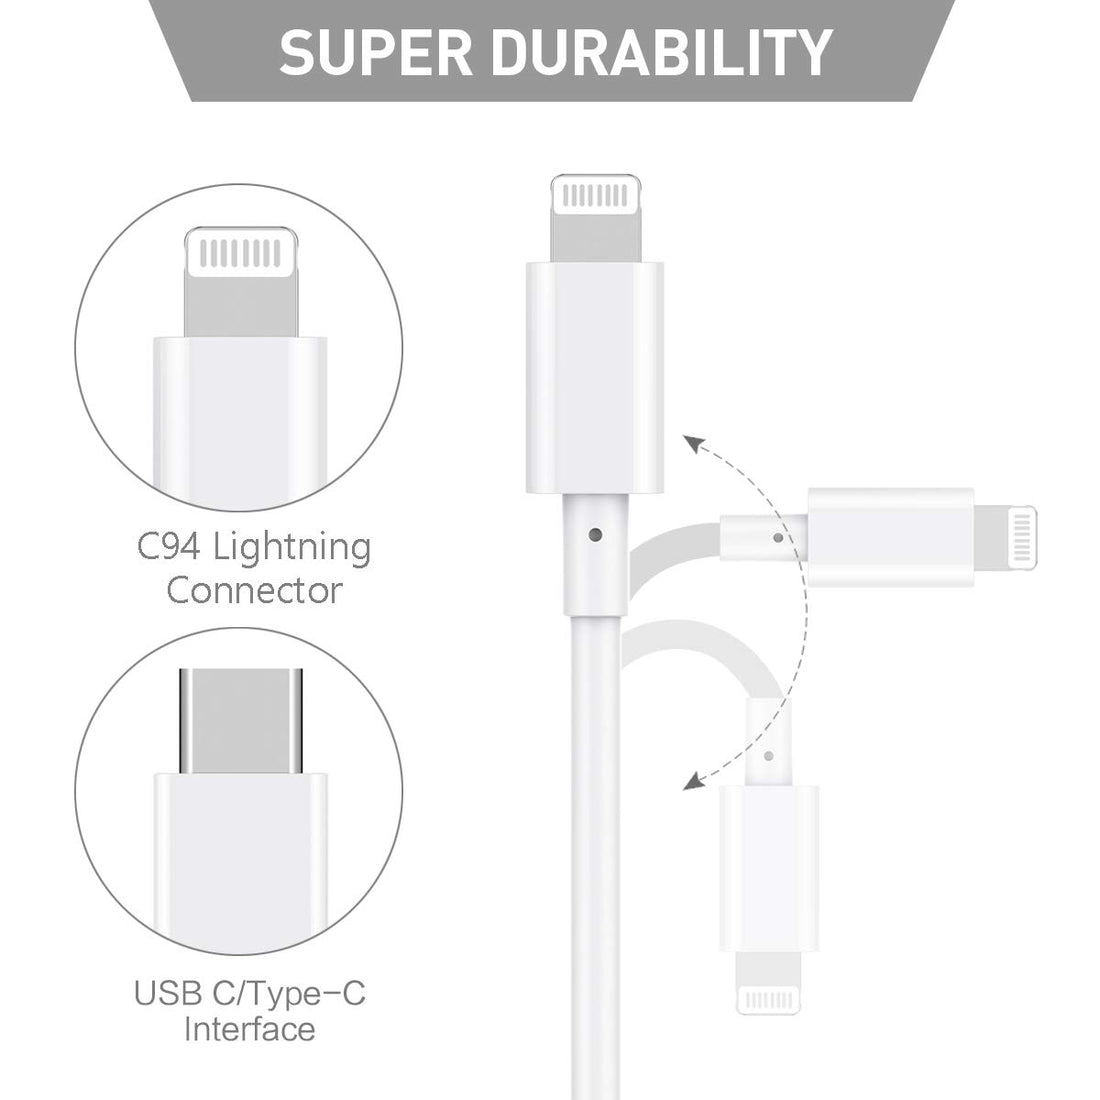 Type C Charging Cable For Iphone, Ipad, Air Pods- White